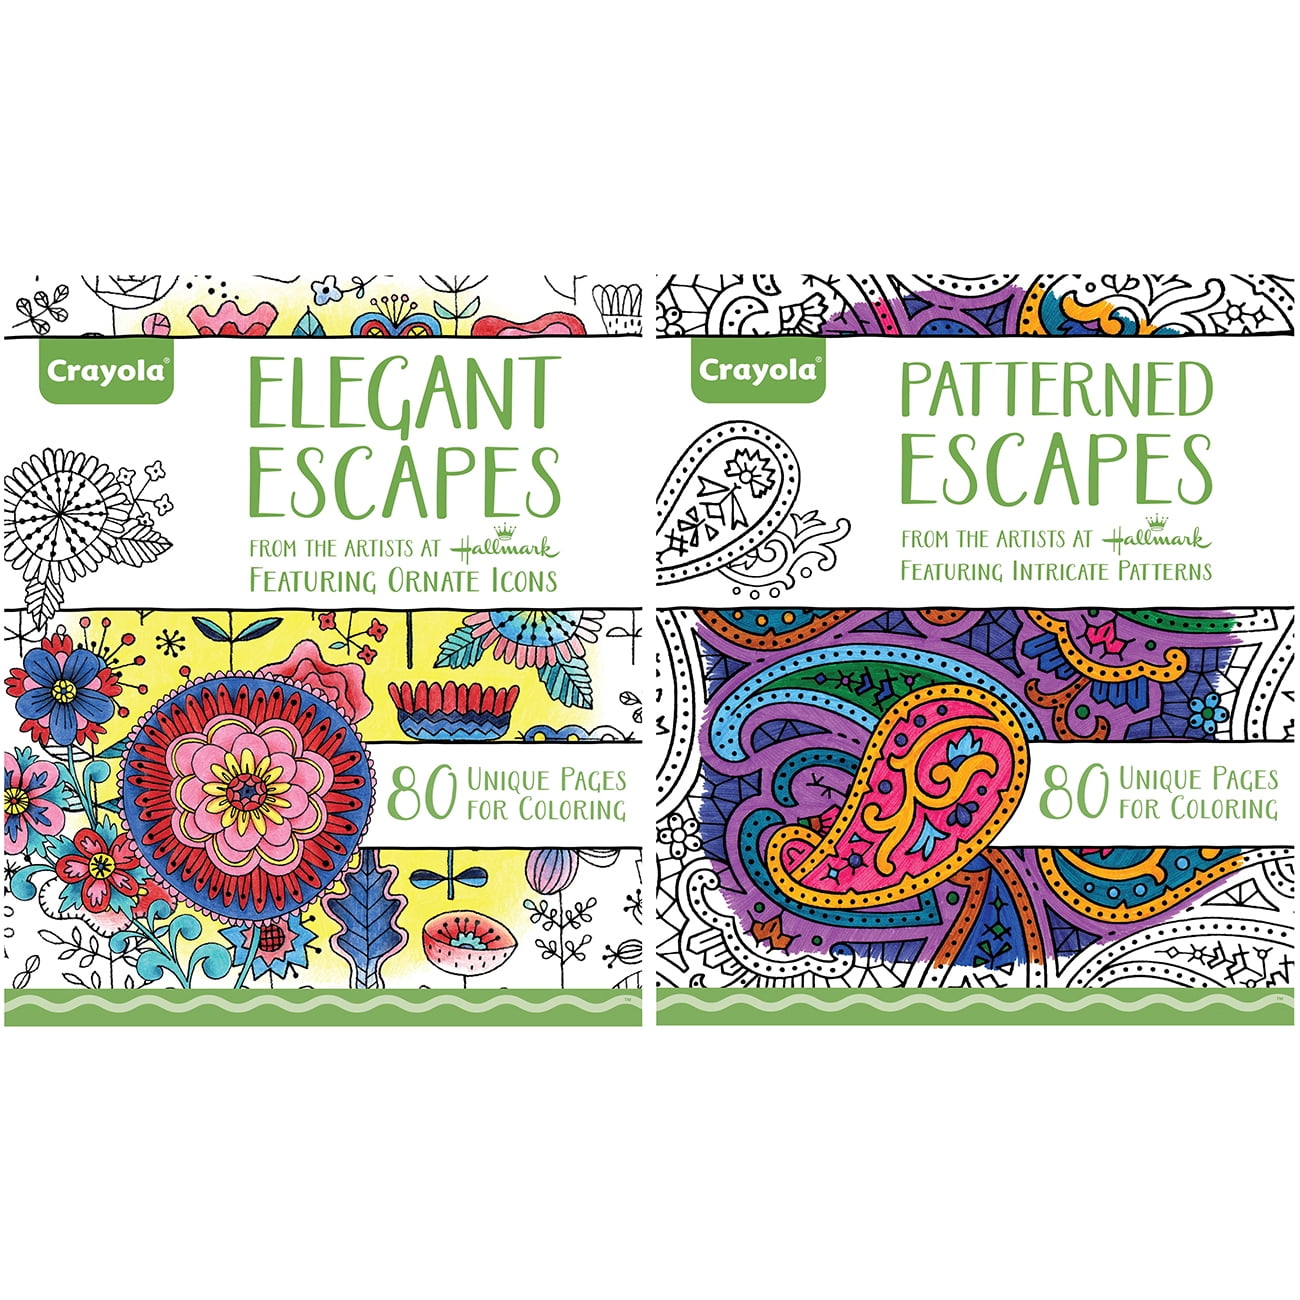 Crayola Adult Coloring Gift Set Includes 100 Count Colored Pencils and the  Elegant Escapes Adult Coloring Book 